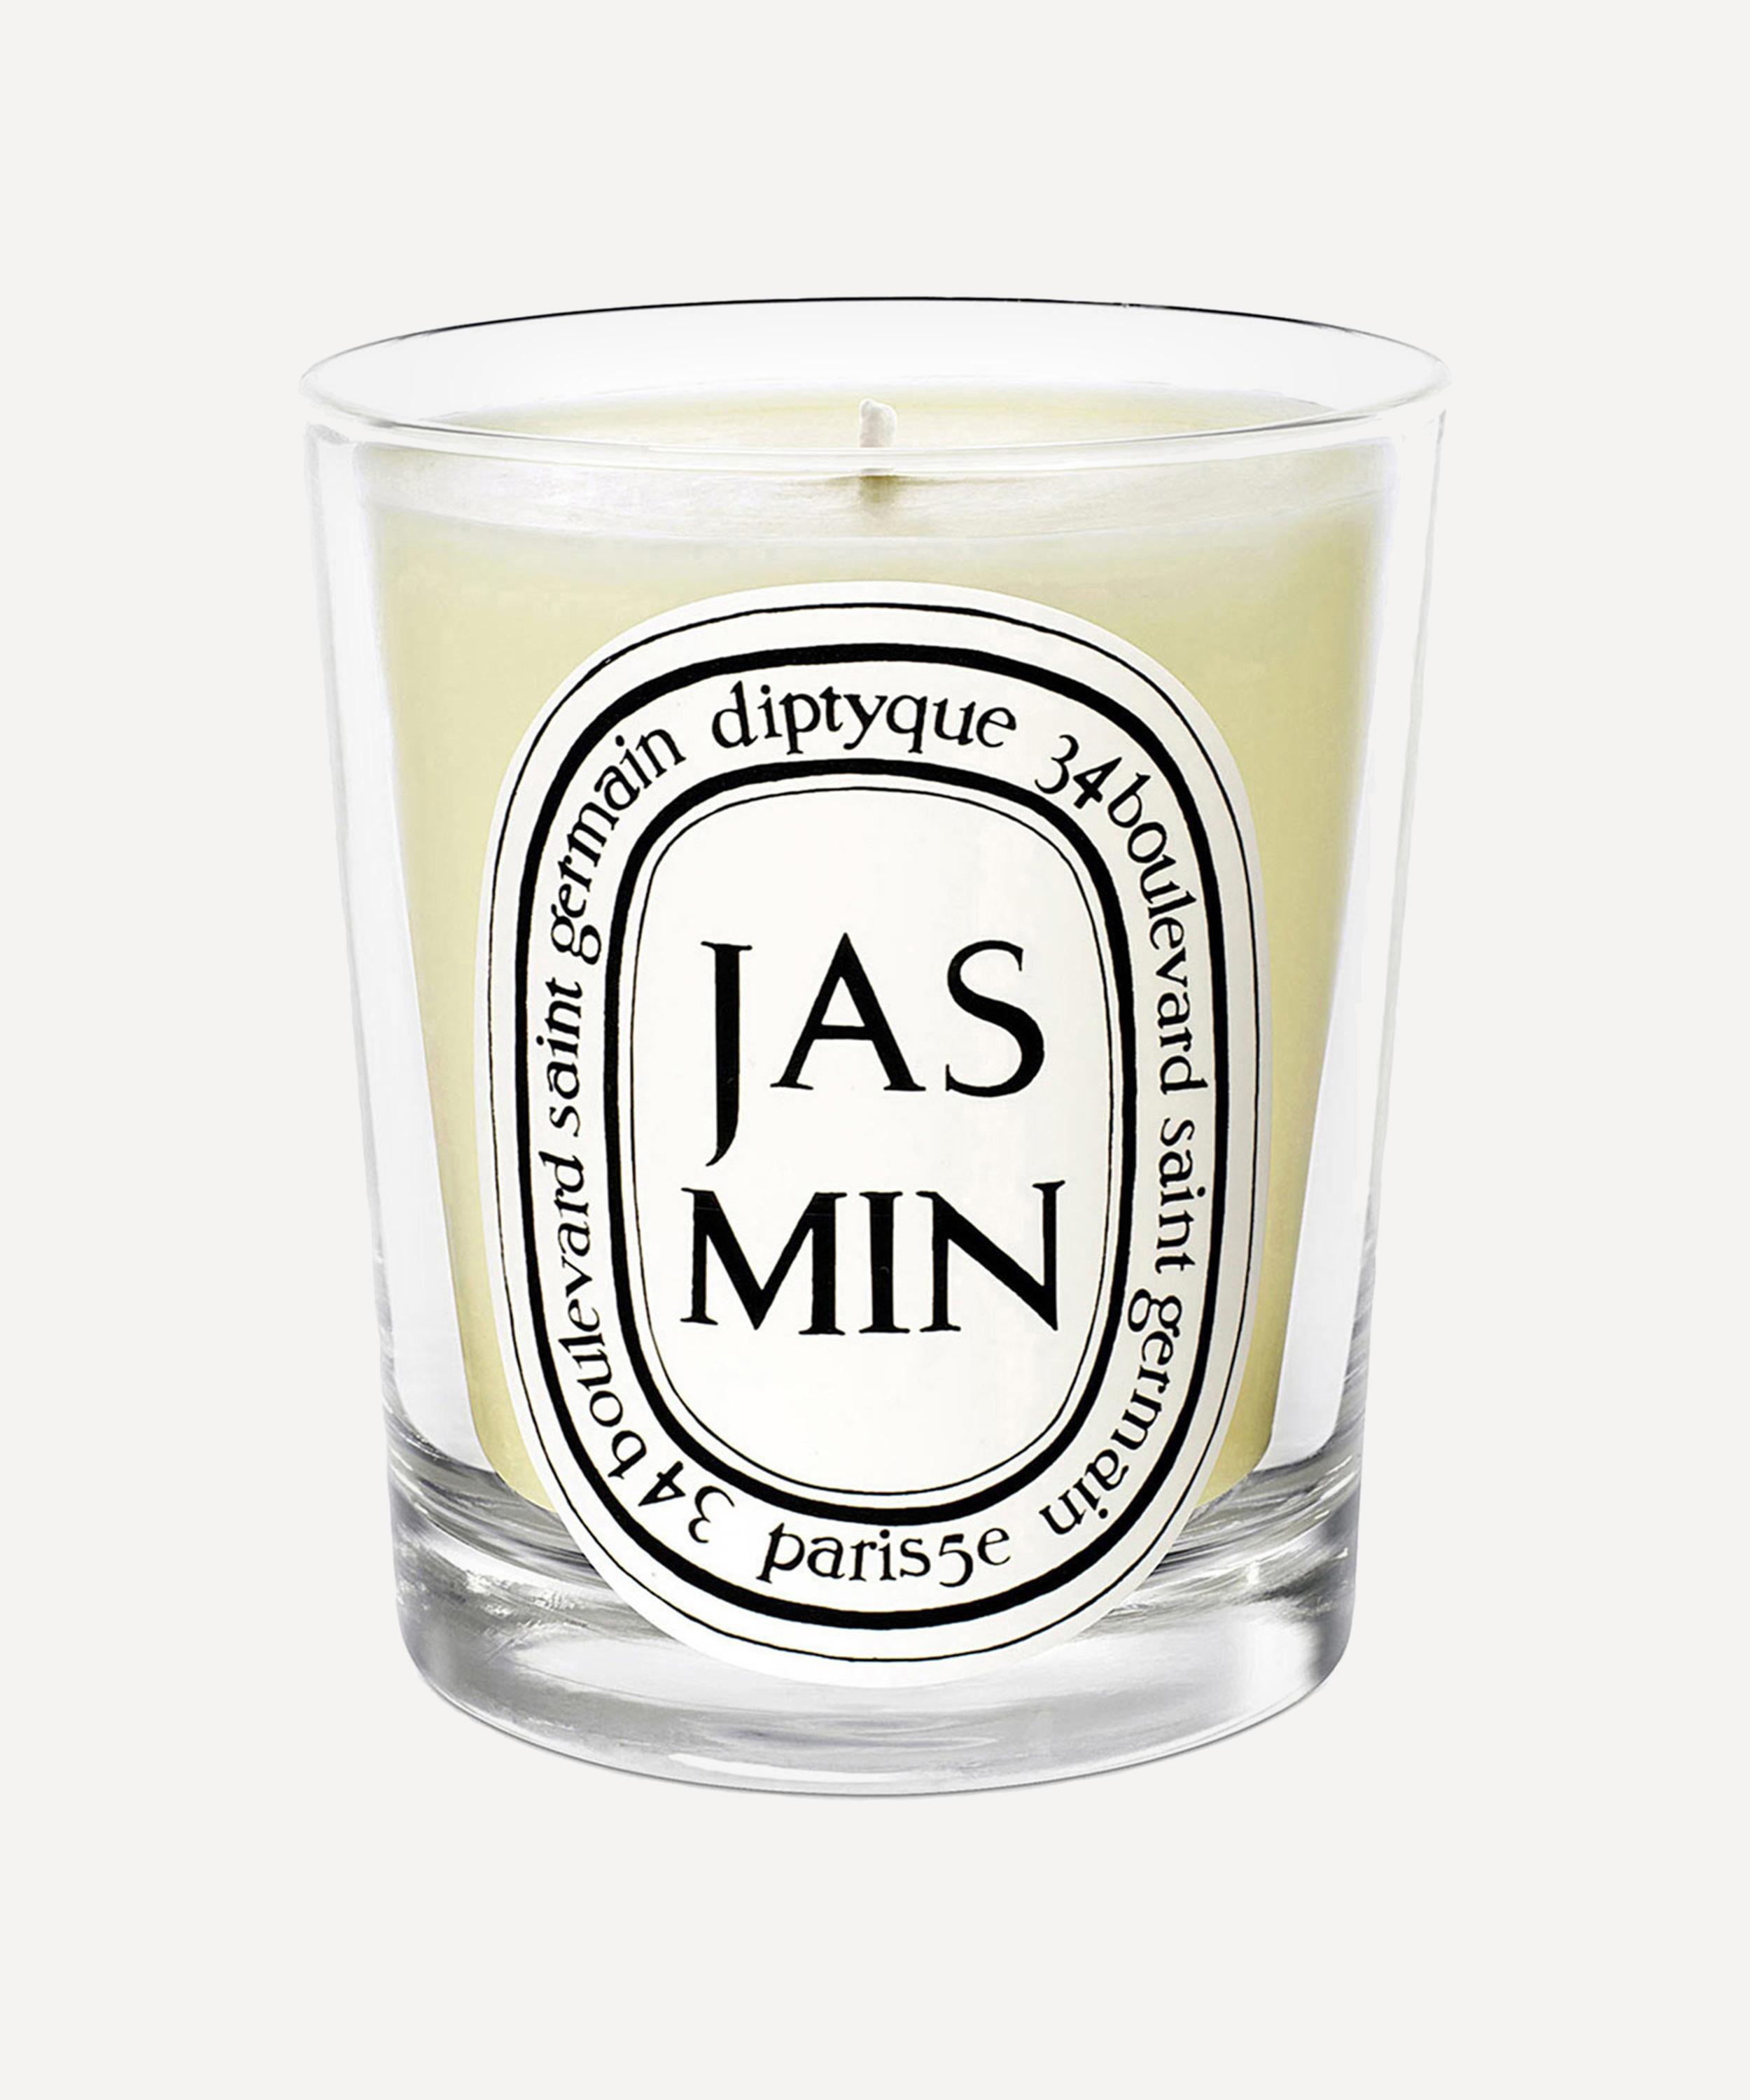 Jasmine Diptyque Scented Candle 190g Candles Jasmin 